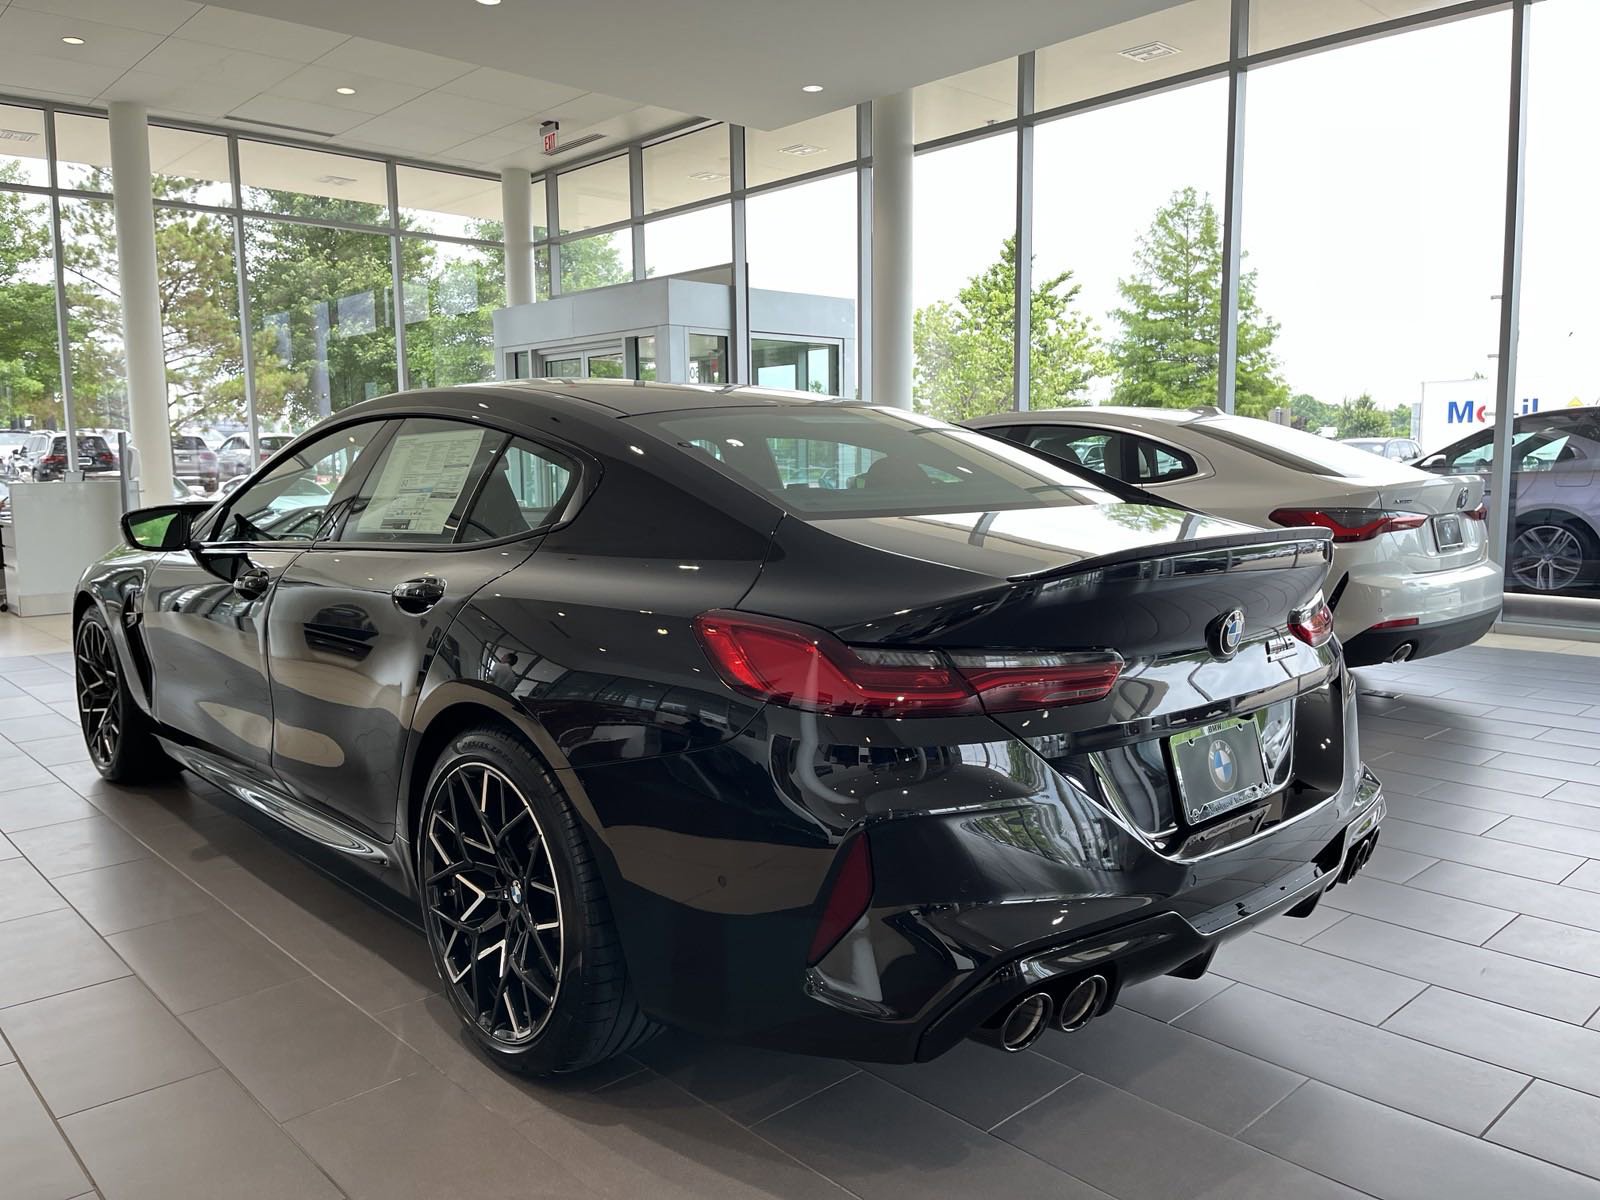 New Bmw M8 Petition 4dr Car In Bentonville Wn39641